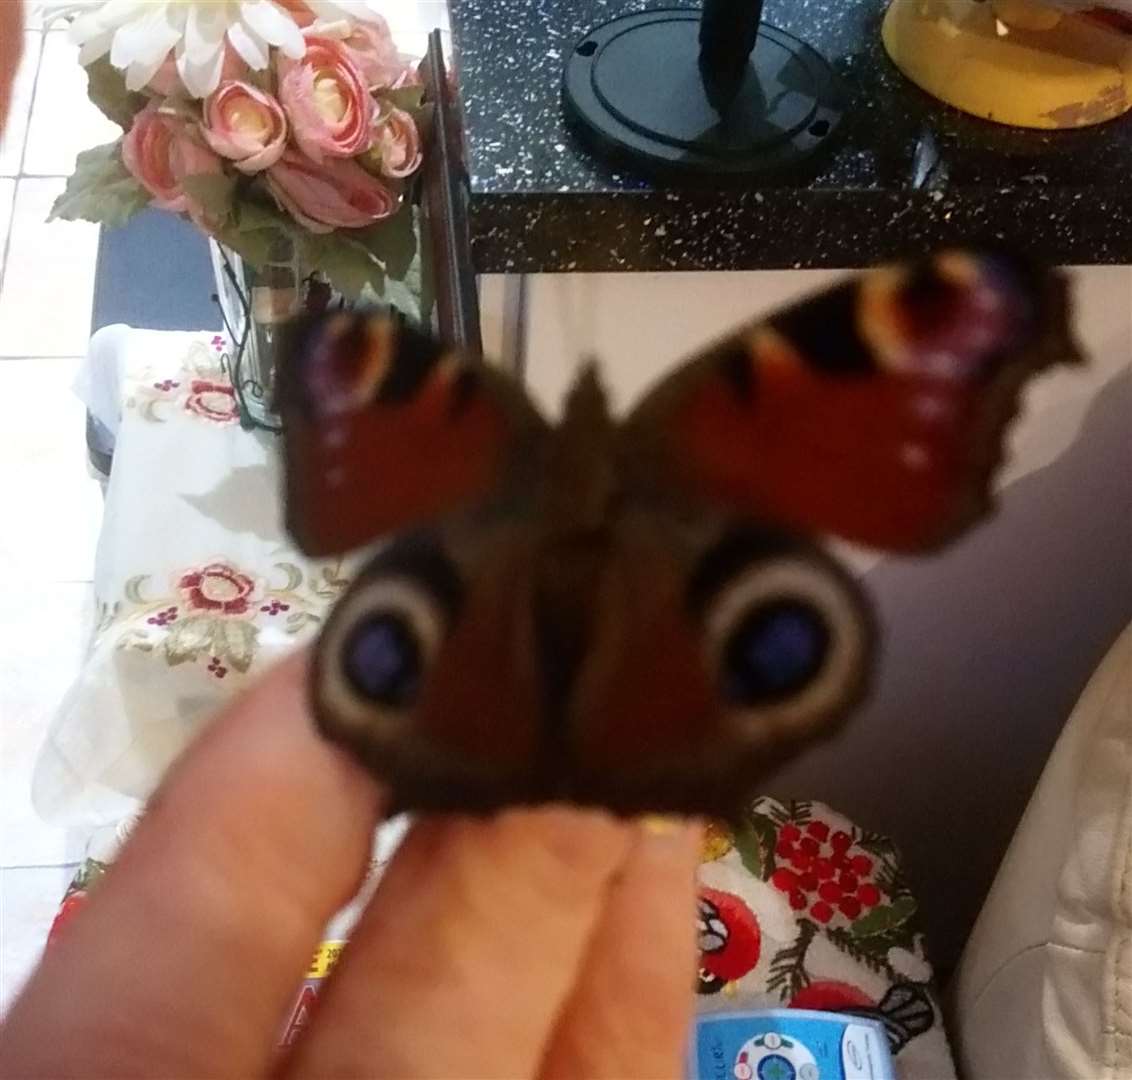 The peacock butterfly found alive in sub-zero temperatures in The Maltings in Rainham